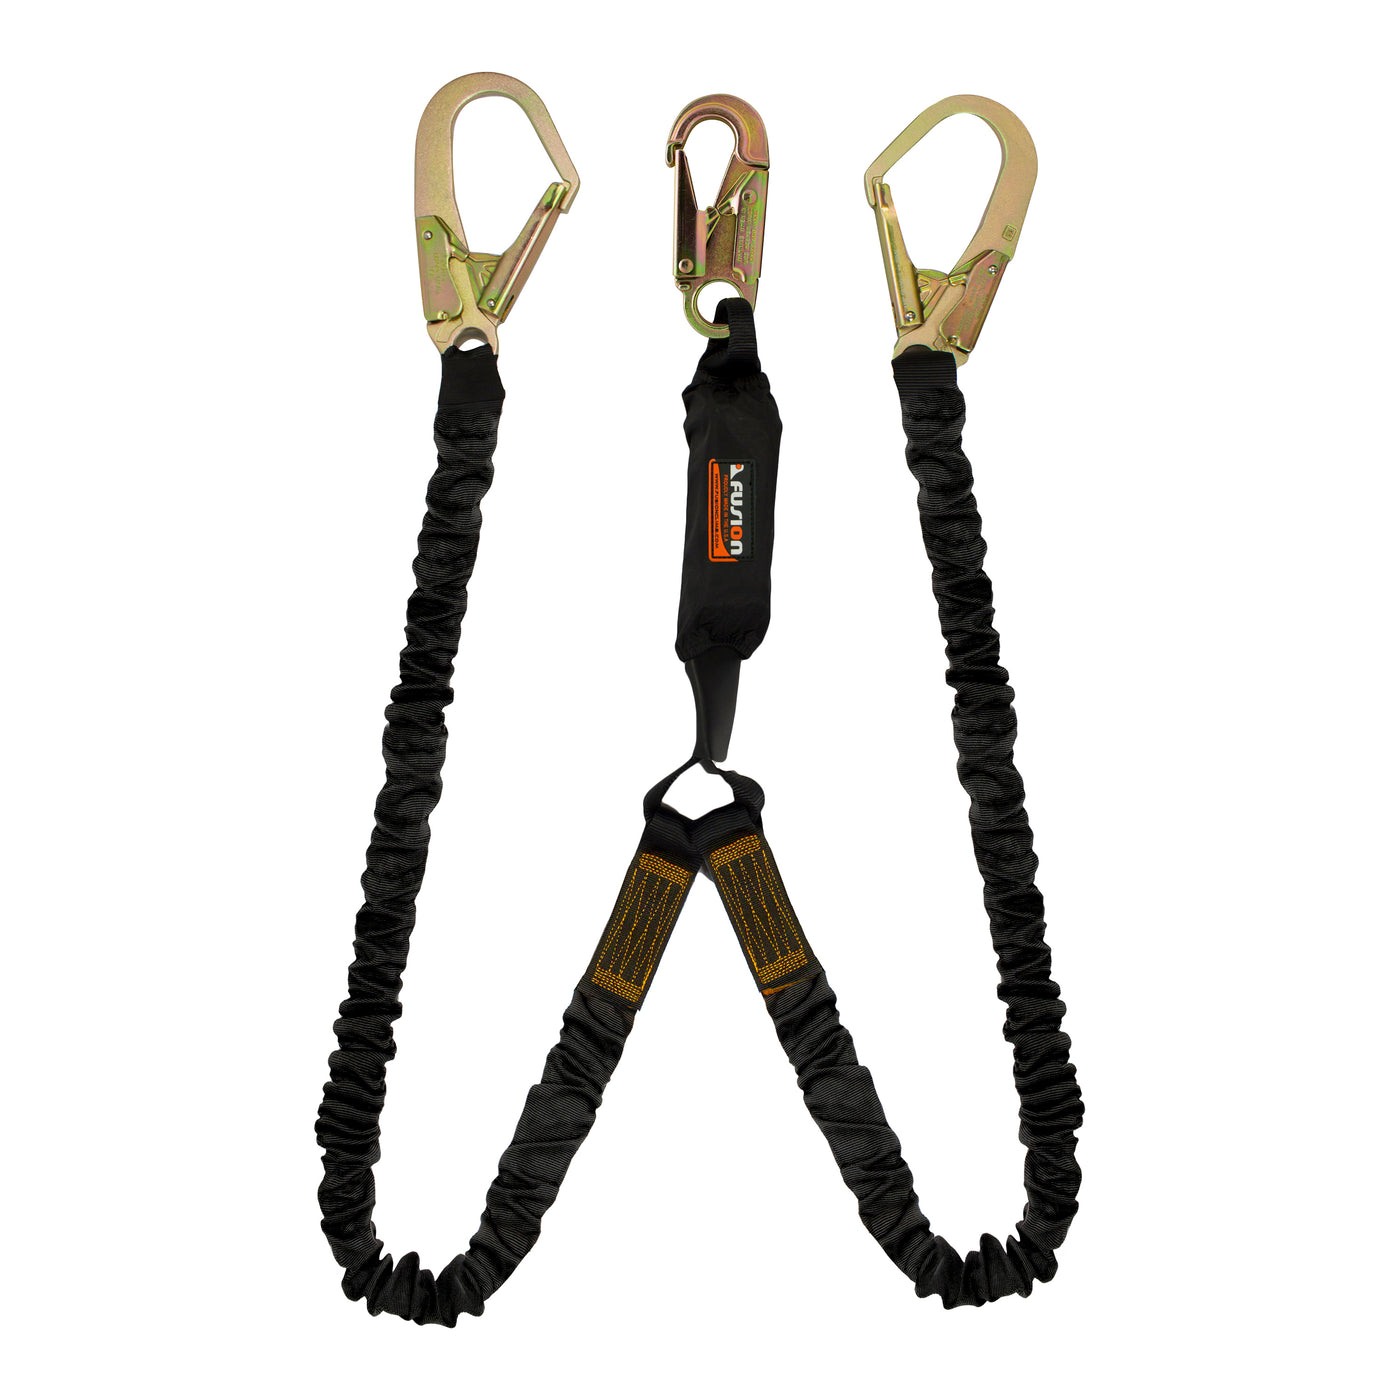 Double Legged Shock Absorbing Lanyard  with rebar hooks and snap hook